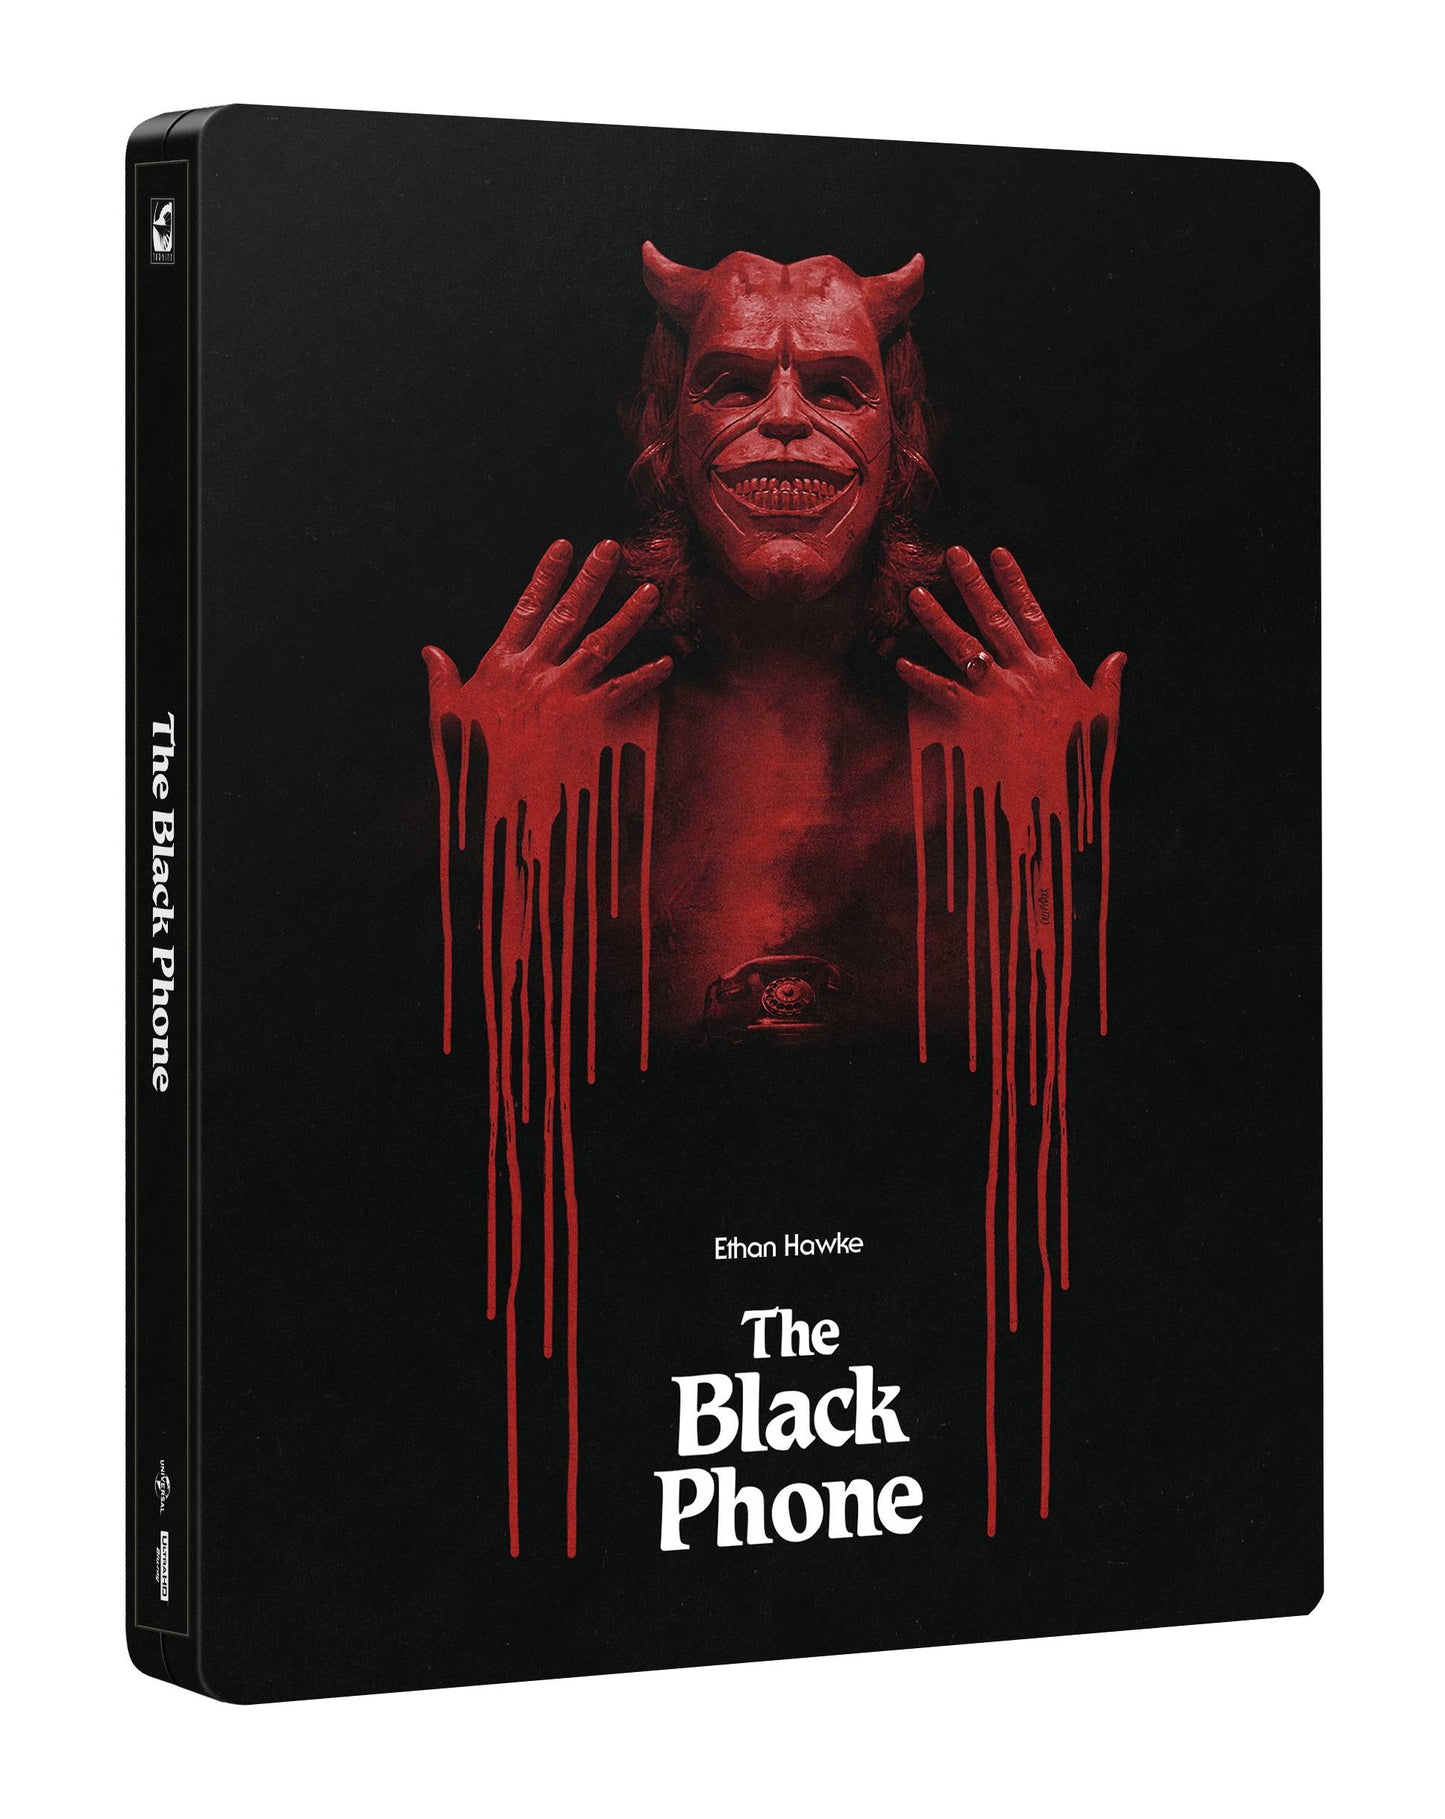 The Black Phone 4K UHD Blu-Ray Steelbook Limited Edition - Preorder